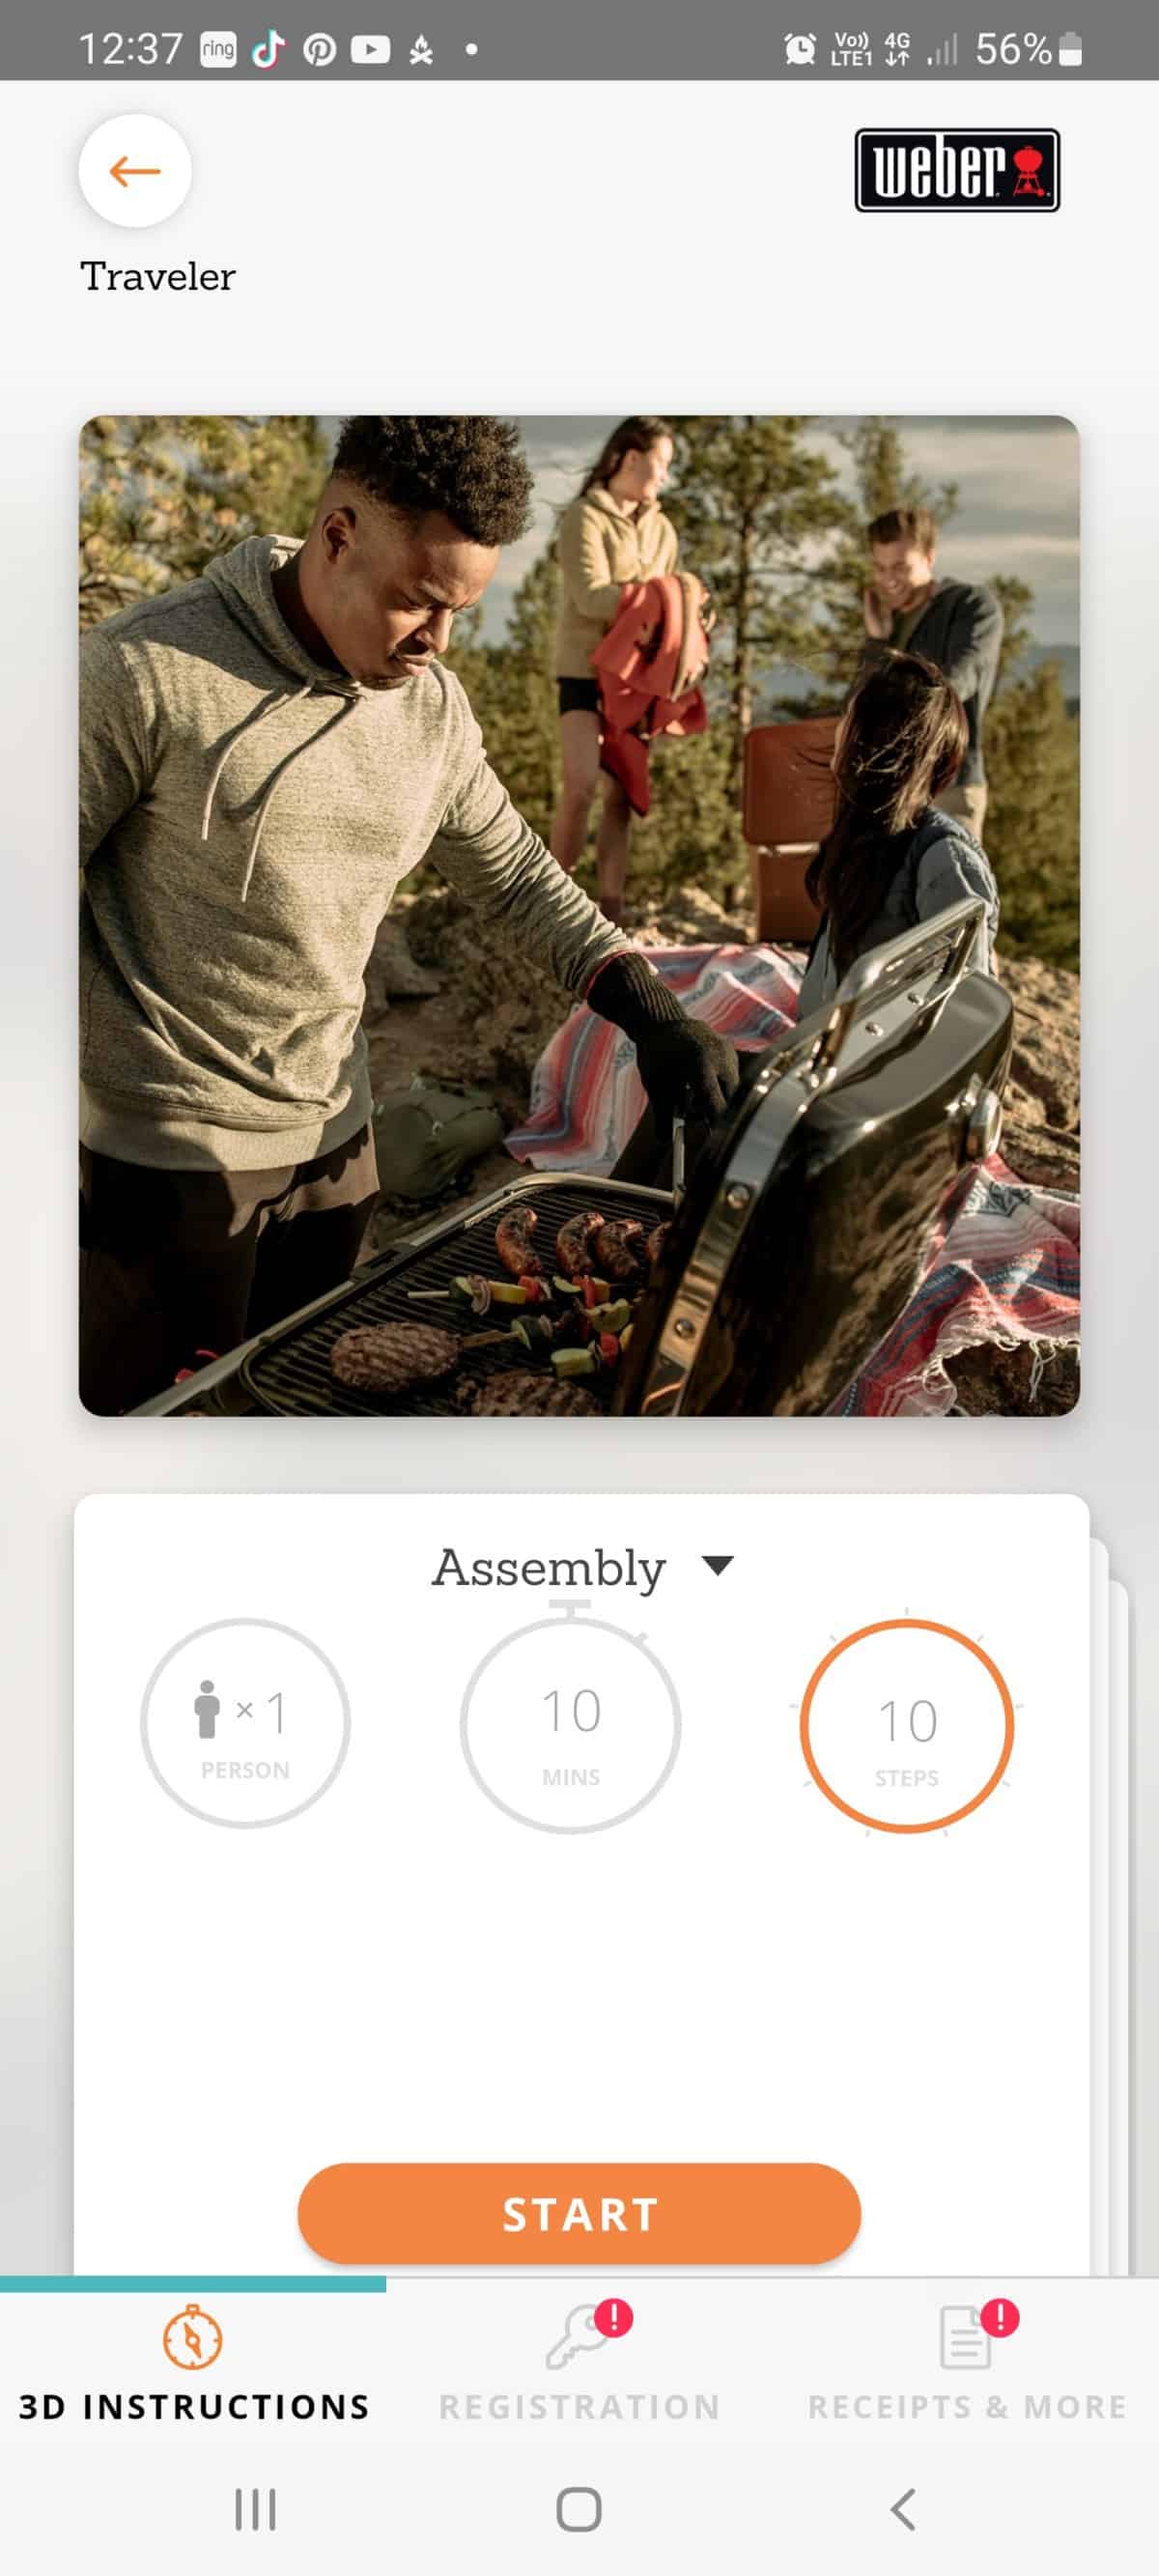 Acressnshot of Android Biltapp showing how long the Weber Traveler takes to assemble